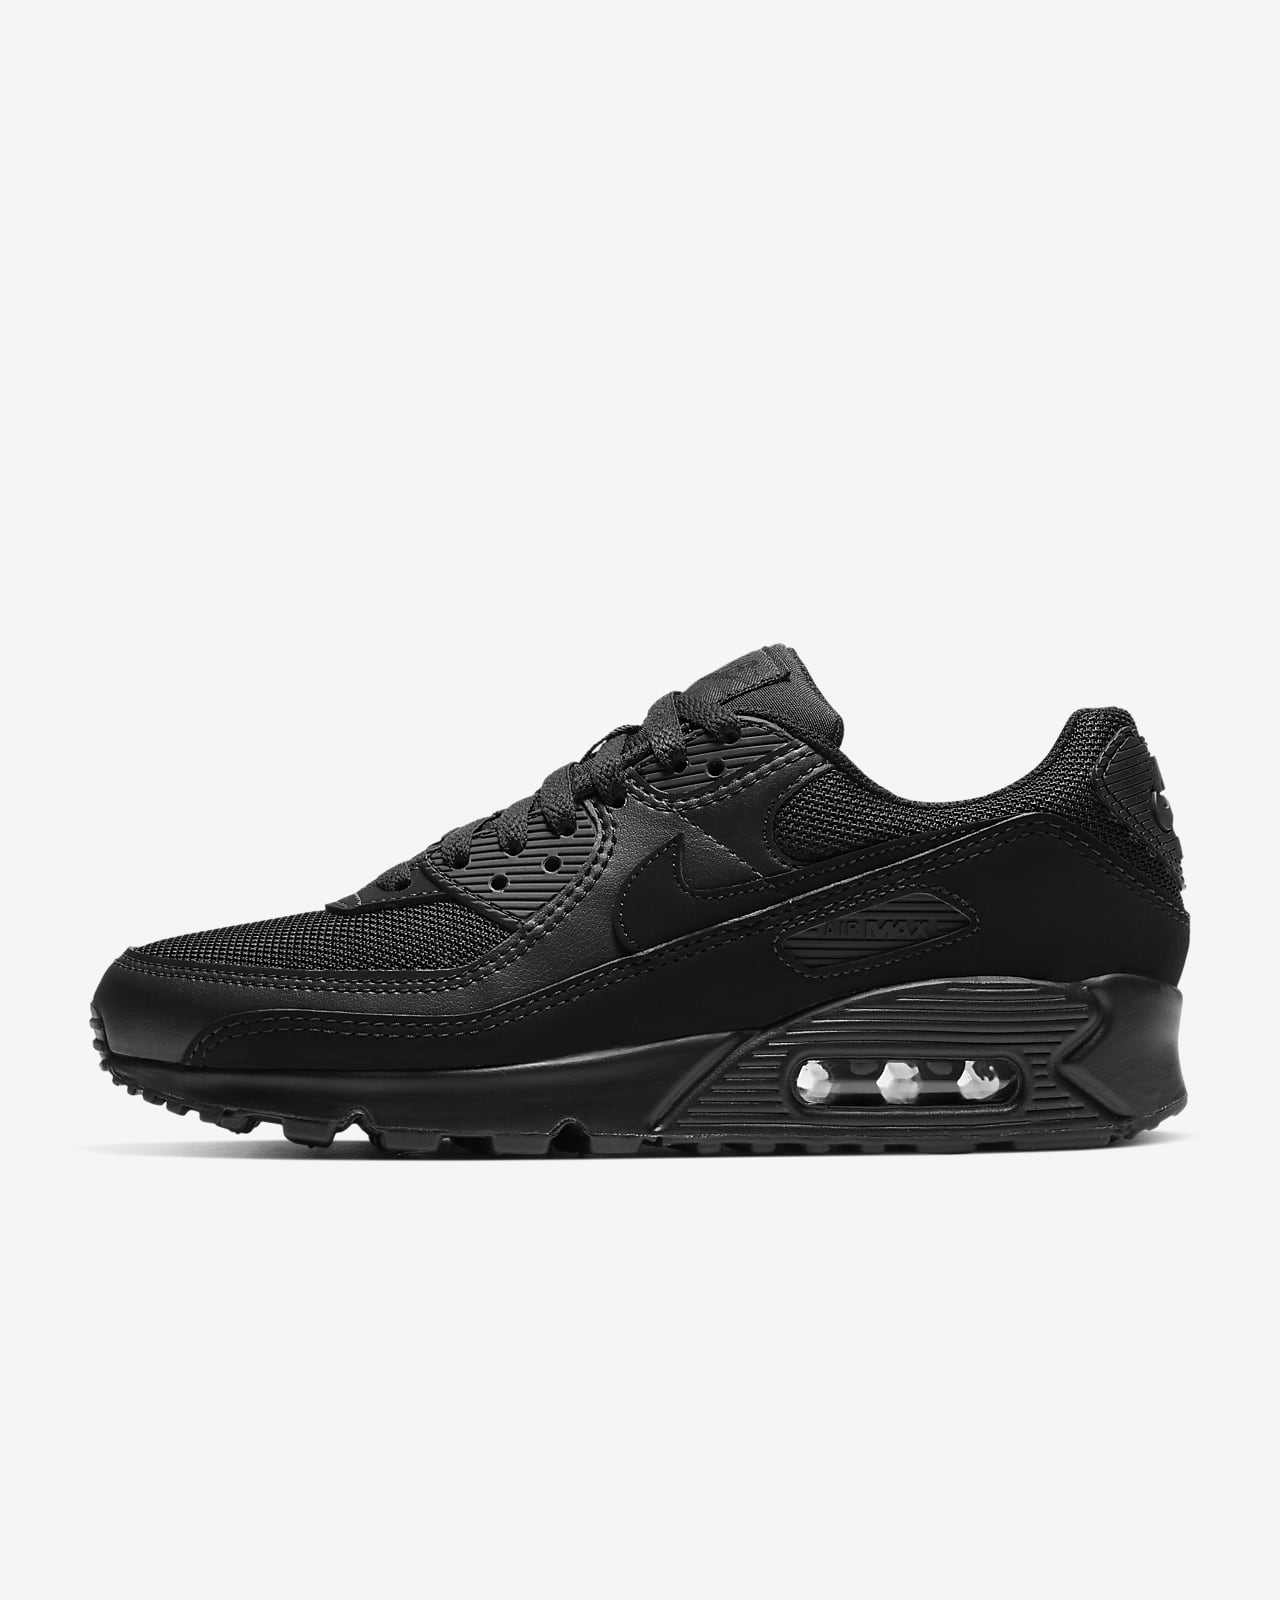 nike air max 90 offers